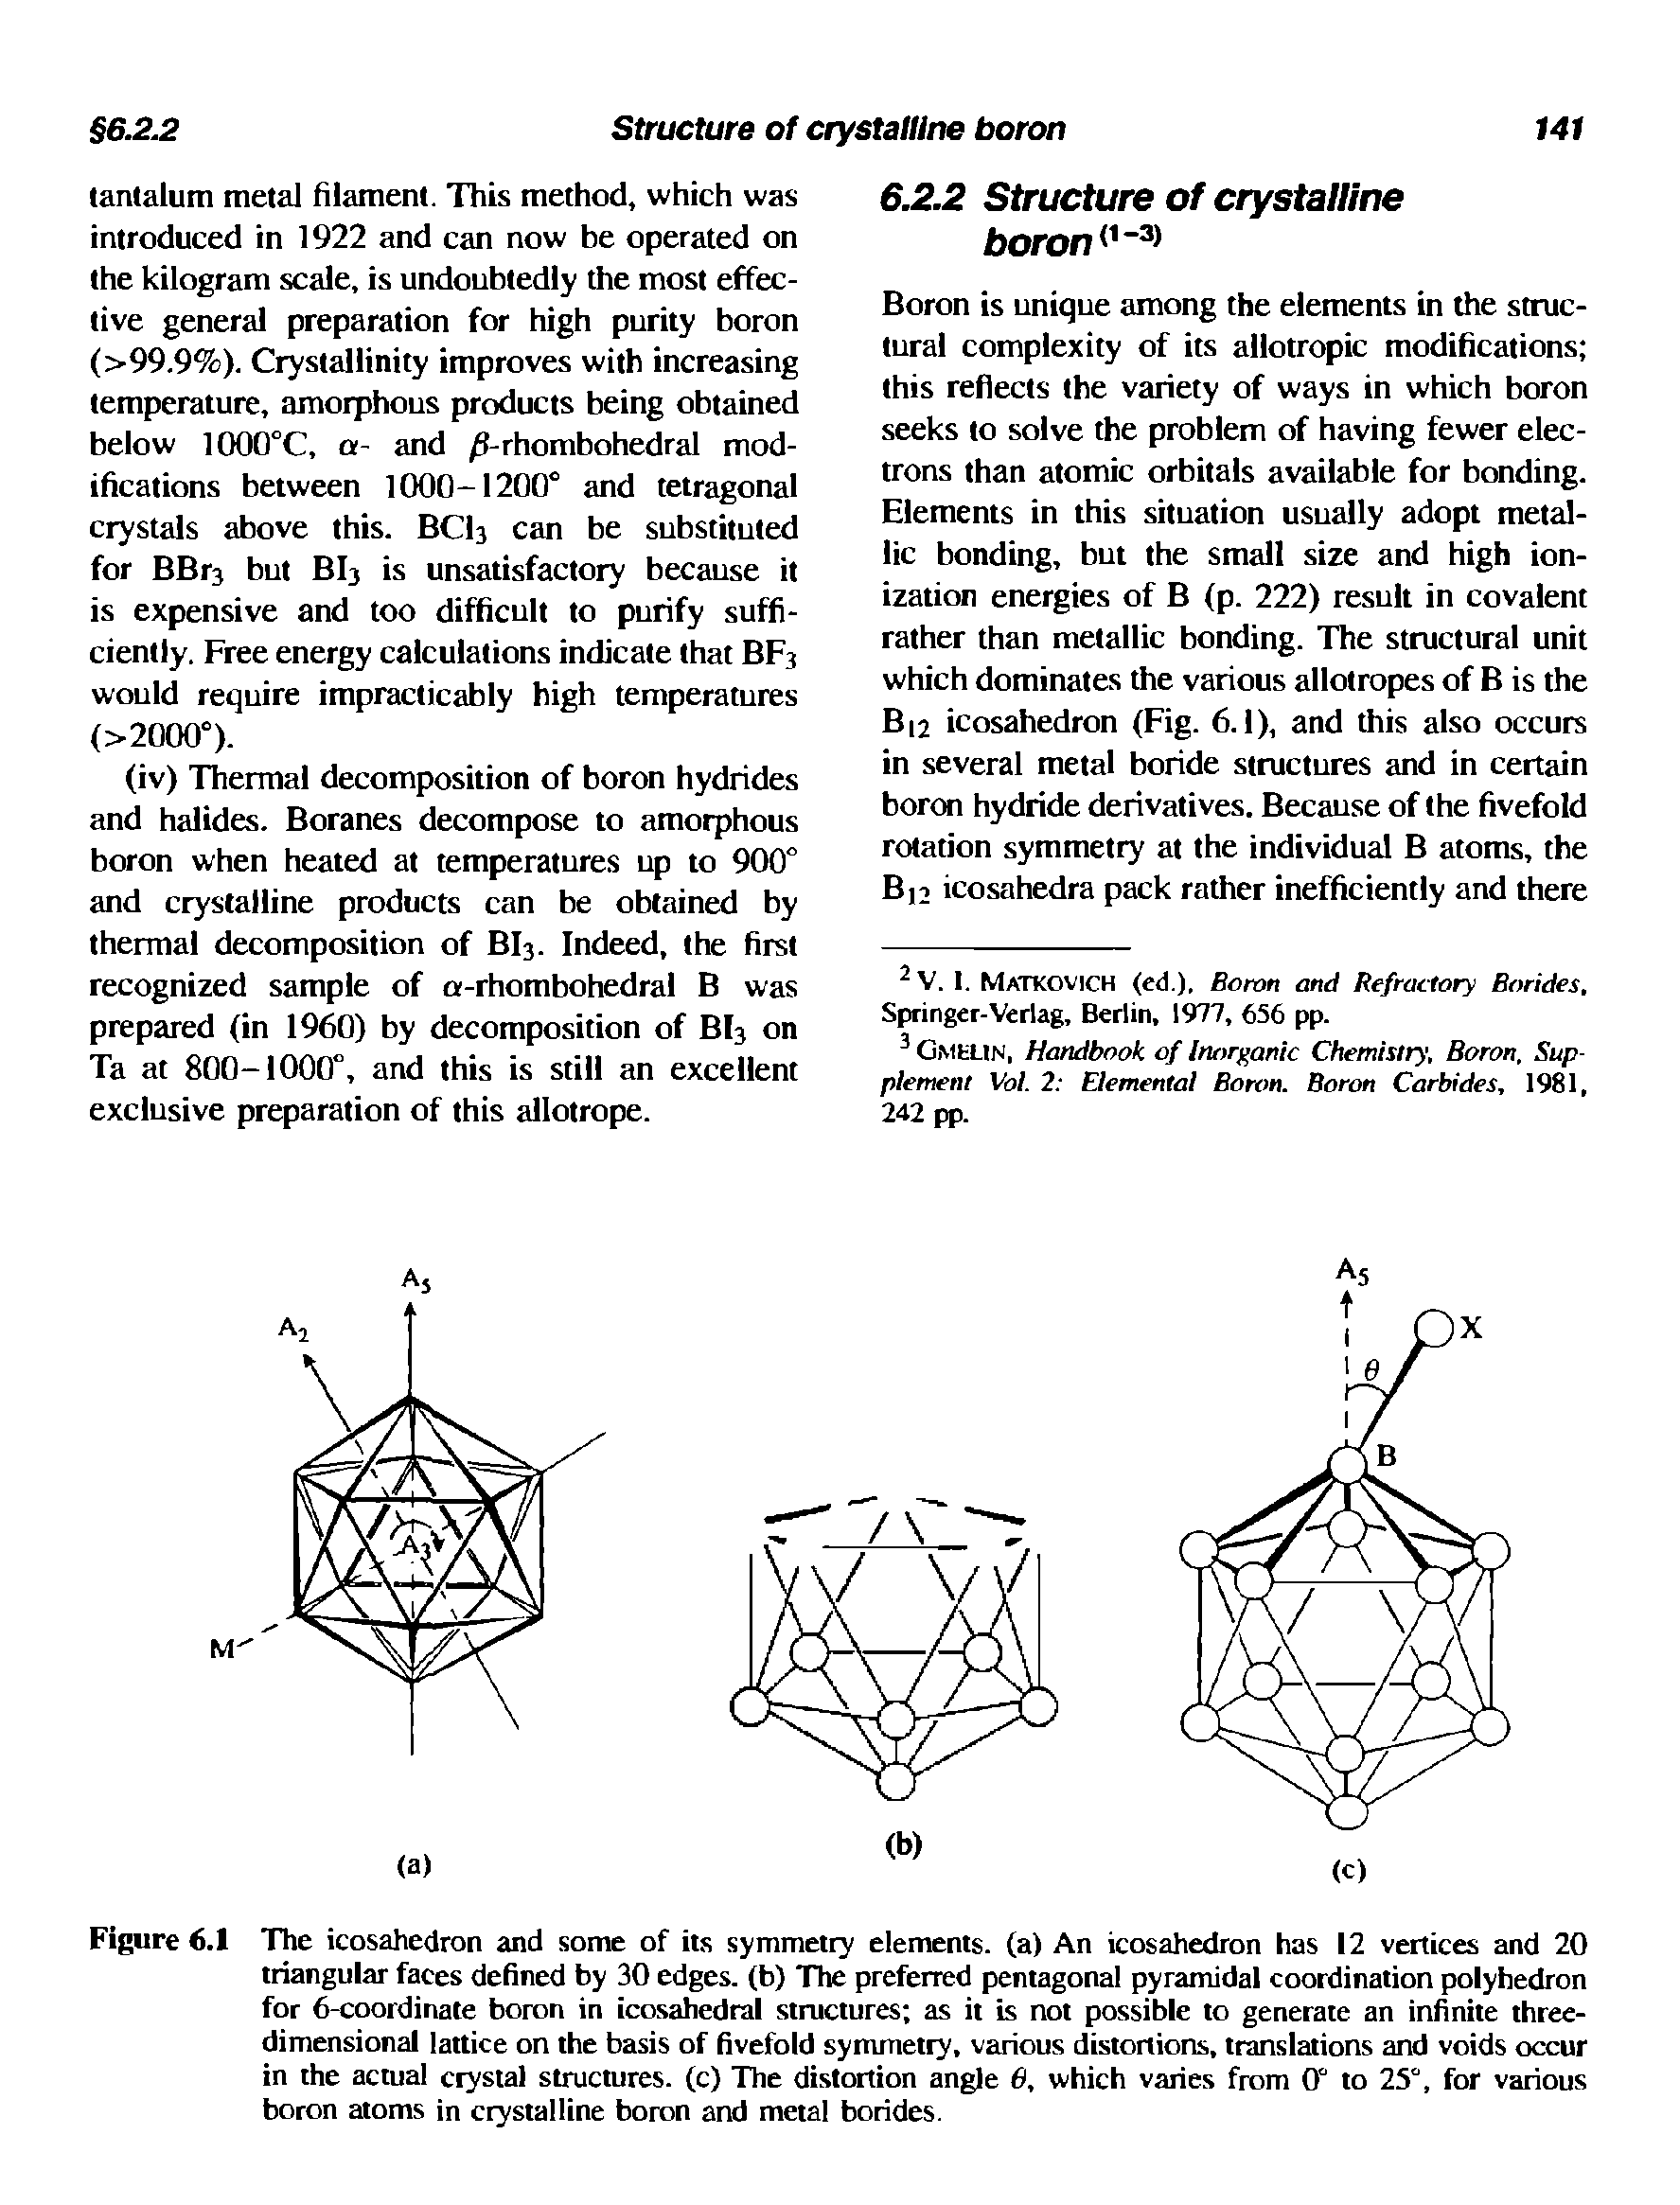 Figure 6.1 The icosahedron and some of its symmetry elements, (a) An icosahedron has 12 vertices and 20 triangular faces defined by 30 edges, (b) The preferred pentagonal pyramidal coordination polyhedron for 6-coordinate boron in icosahedral structures as it is not possible to generate an infinite three-dimensional lattice on the basis of fivefold symmetry, various distortions, translations and voids occur in the actual crystal structures, (c) The distortion angle 0, which varies from 0° to 25°, for various boron atoms in crystalline boron and metal borides.